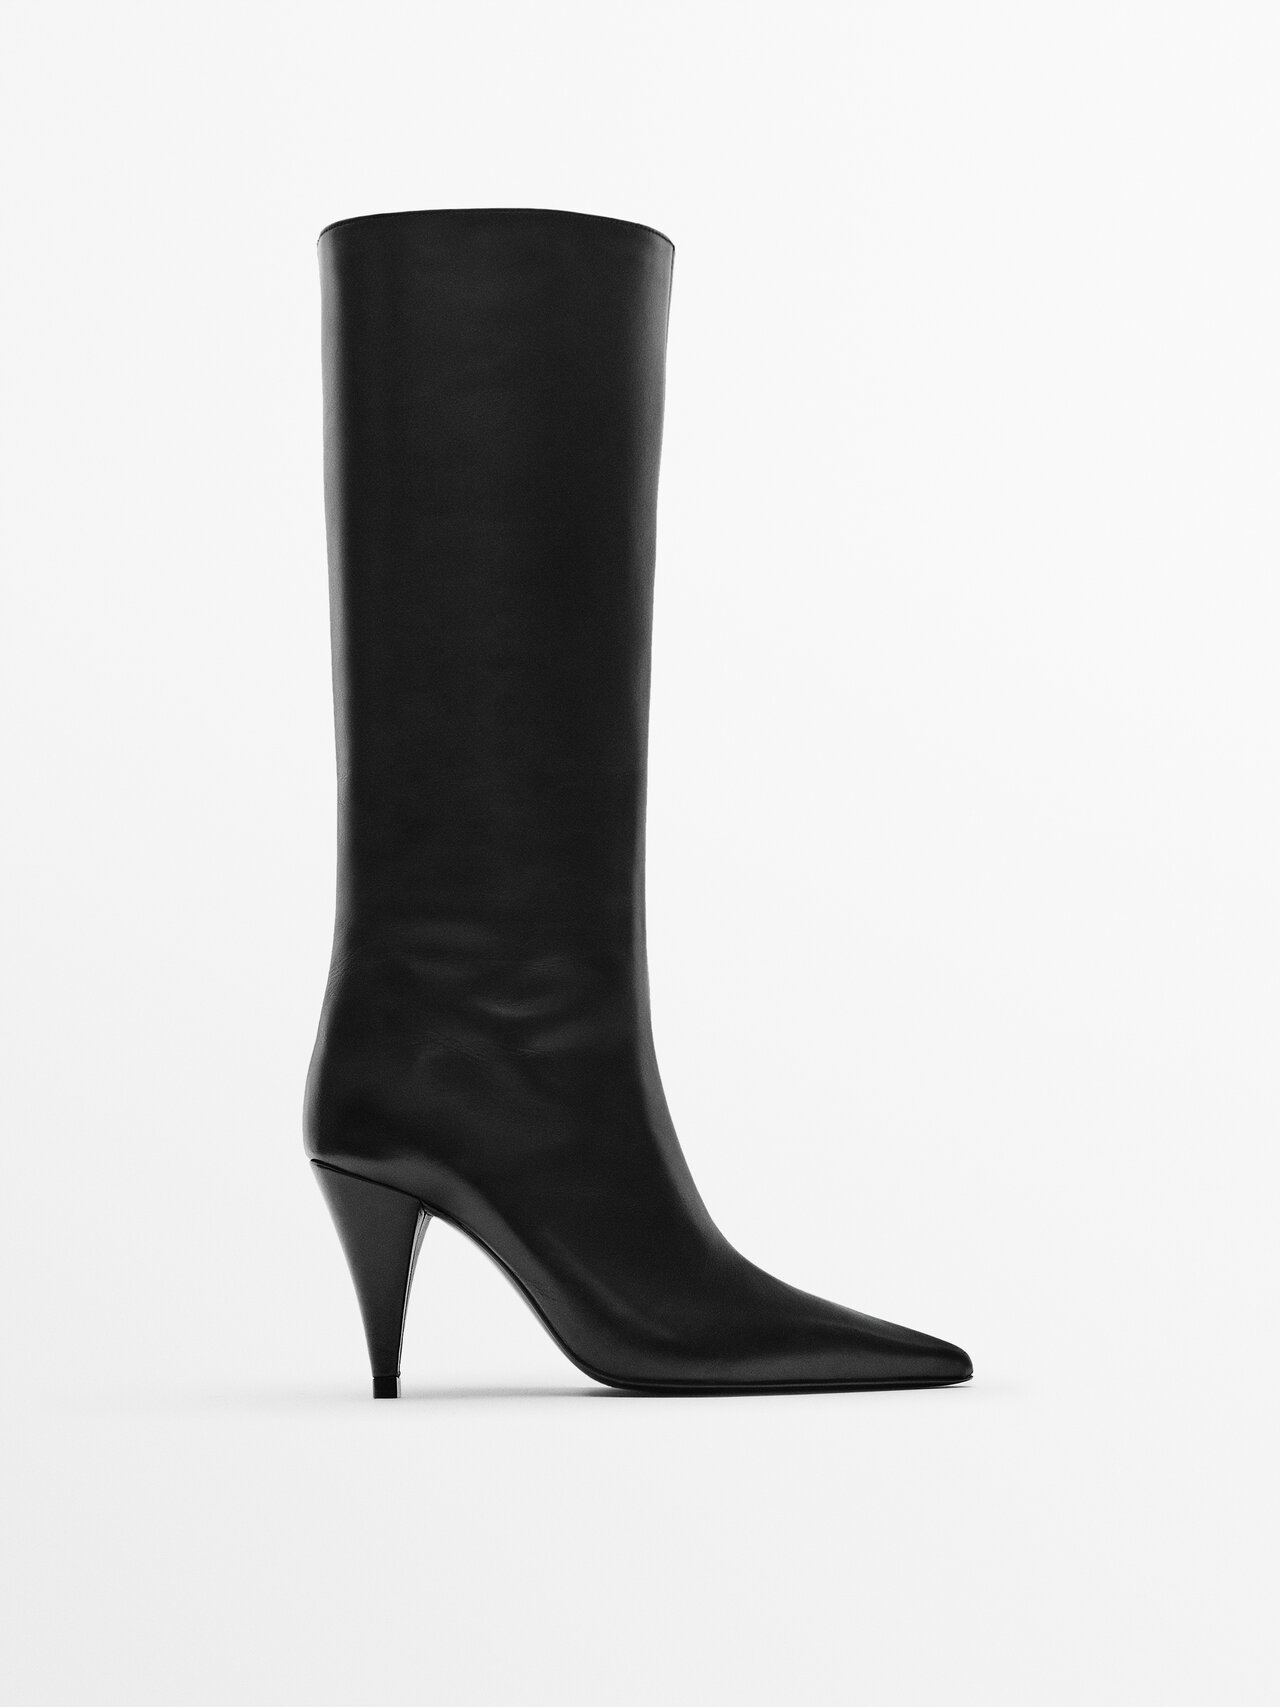 Massimo Dutti Pointed Leather High-heel Boots - Studio In Black